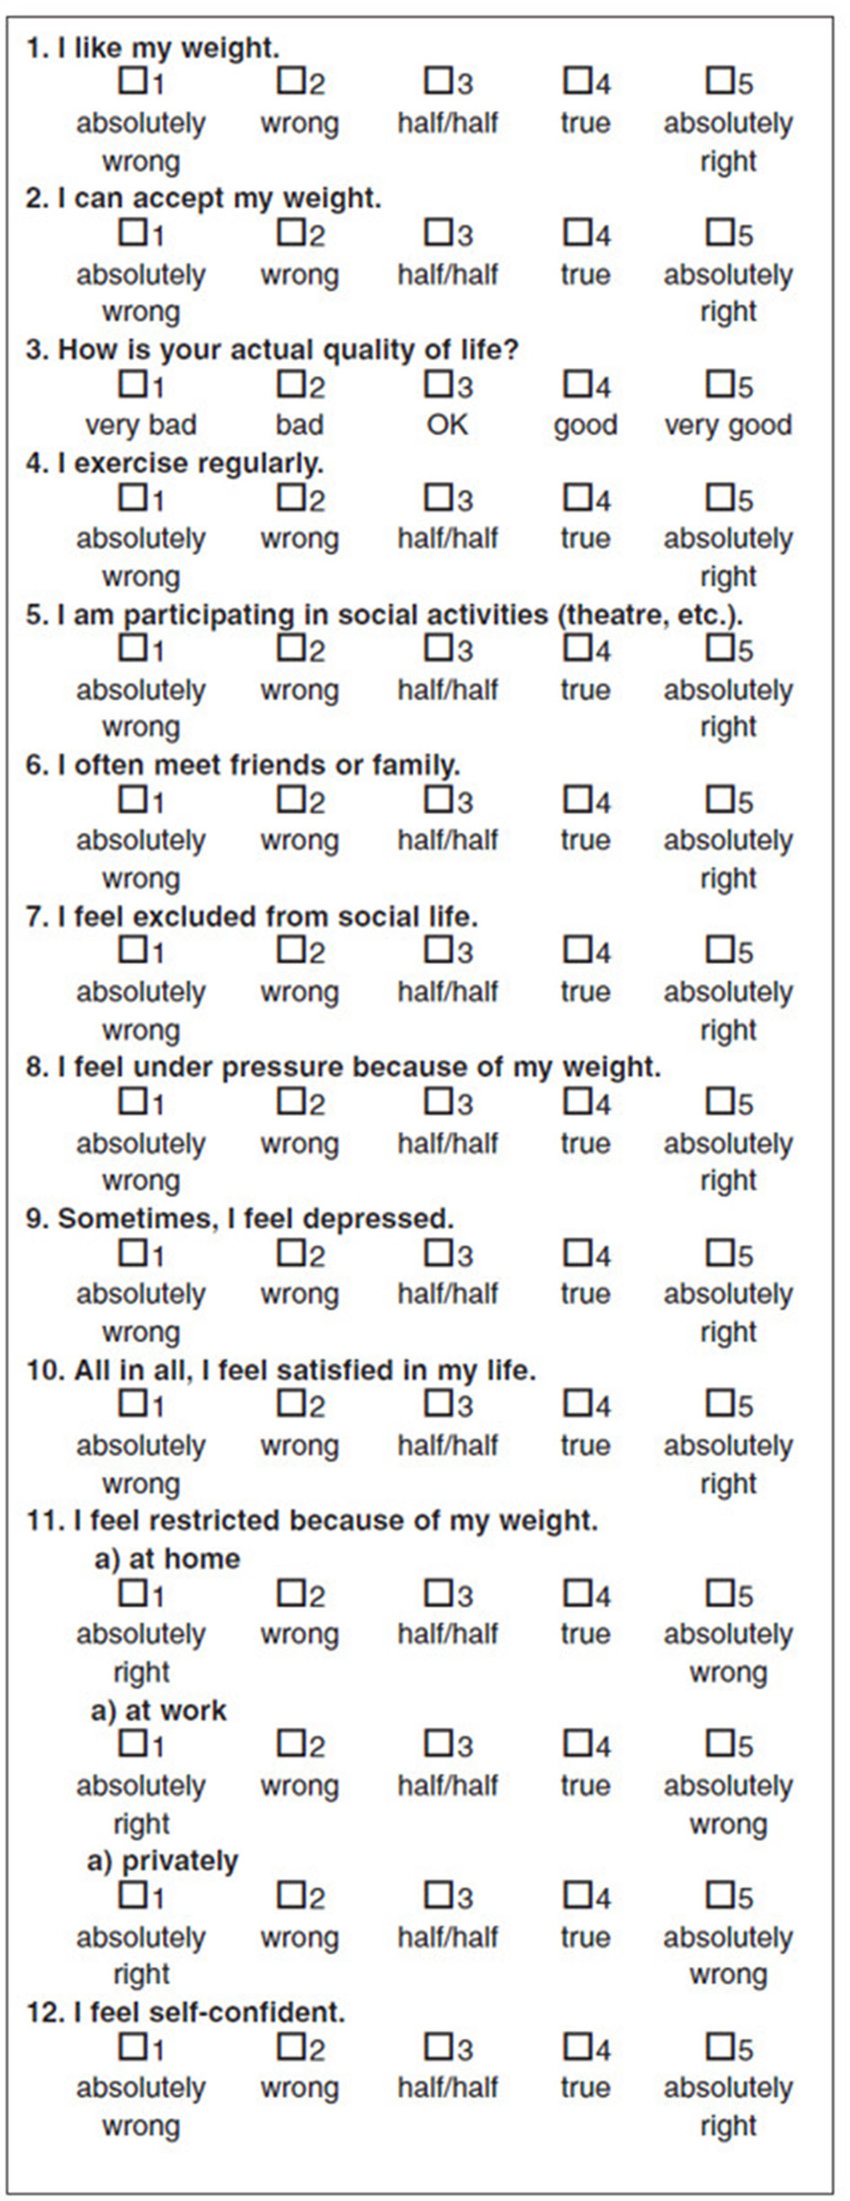 The Bariatric Quality of Life questionnaire (part 2) From Weiner et al